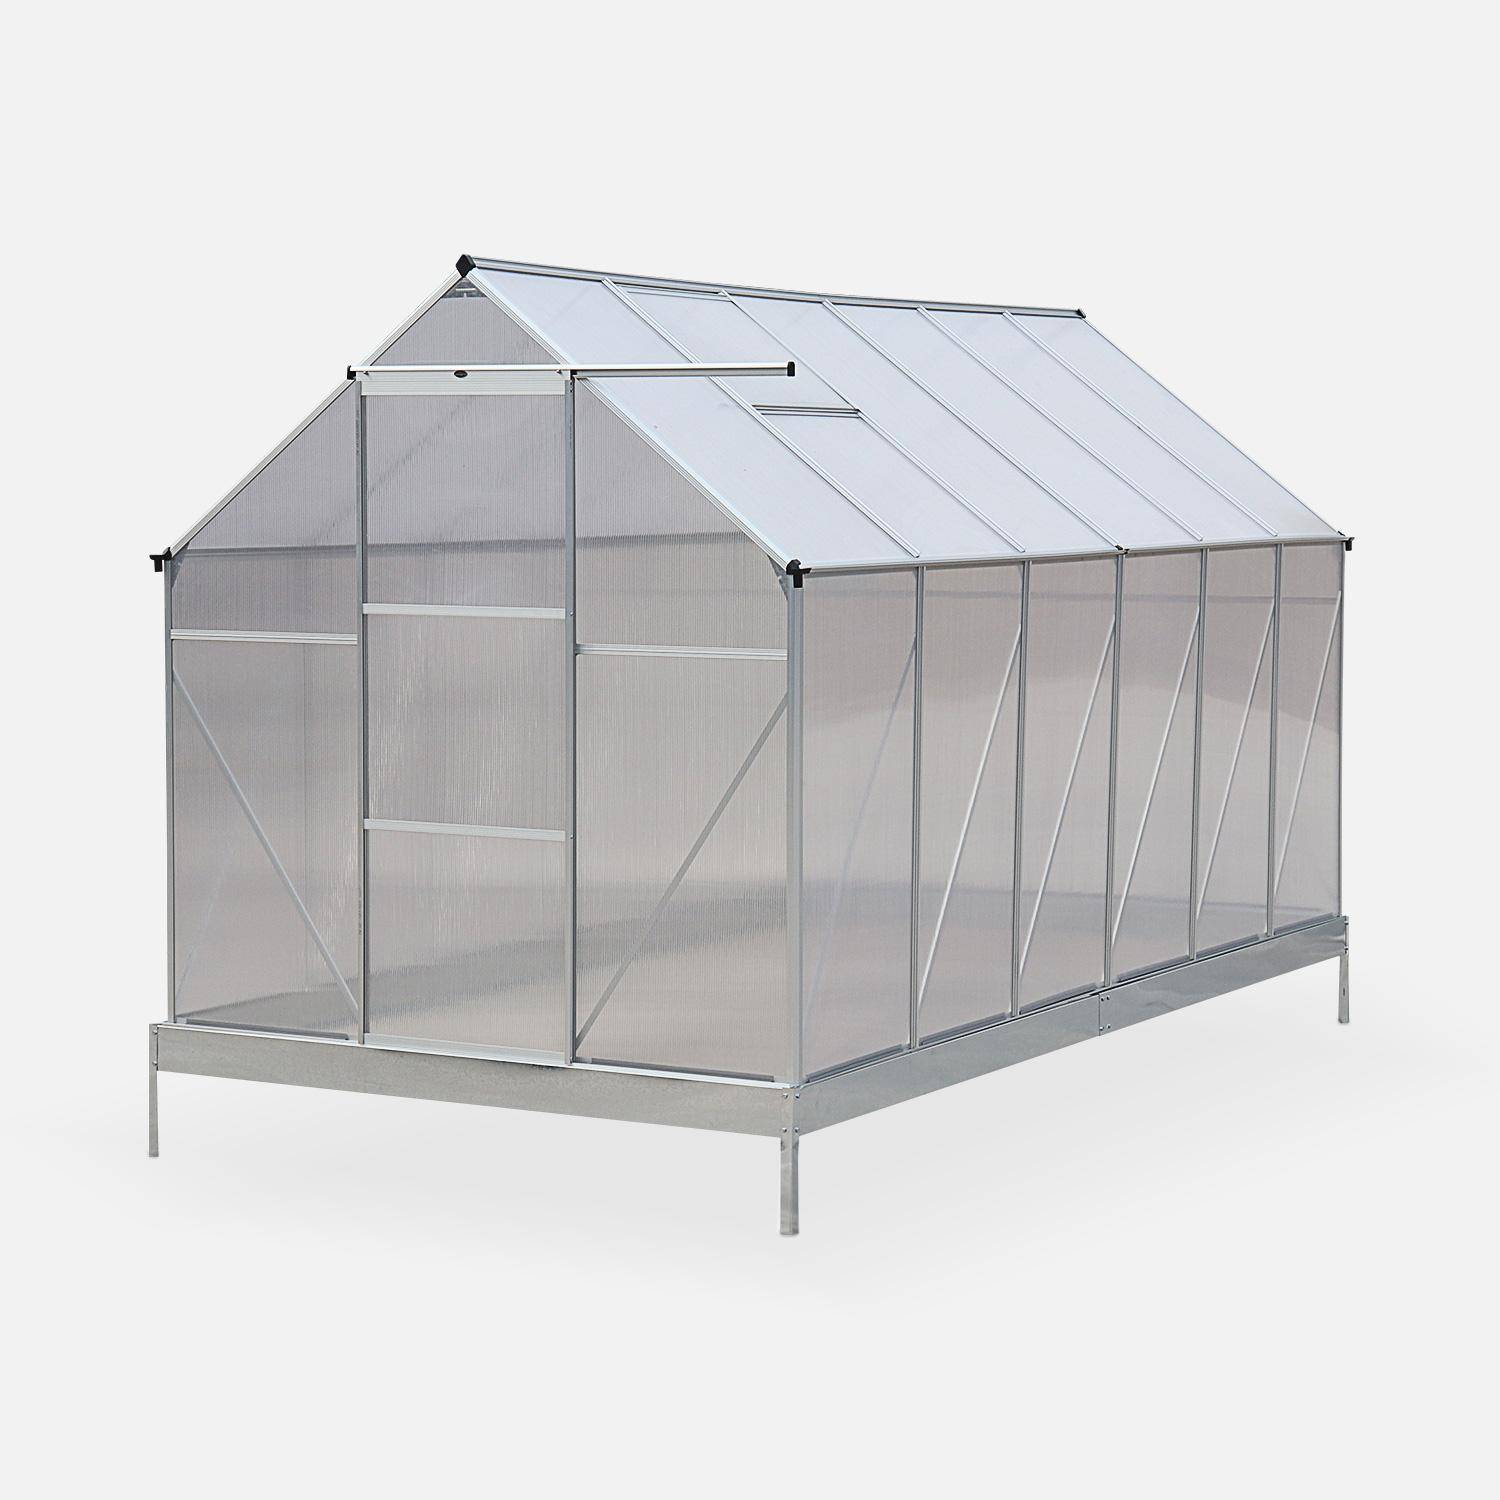 7m², 14x7FT polycarbonate (4mm) greenhouse with base frame - 2 skylights, gutter - Sapin - Grey Photo1